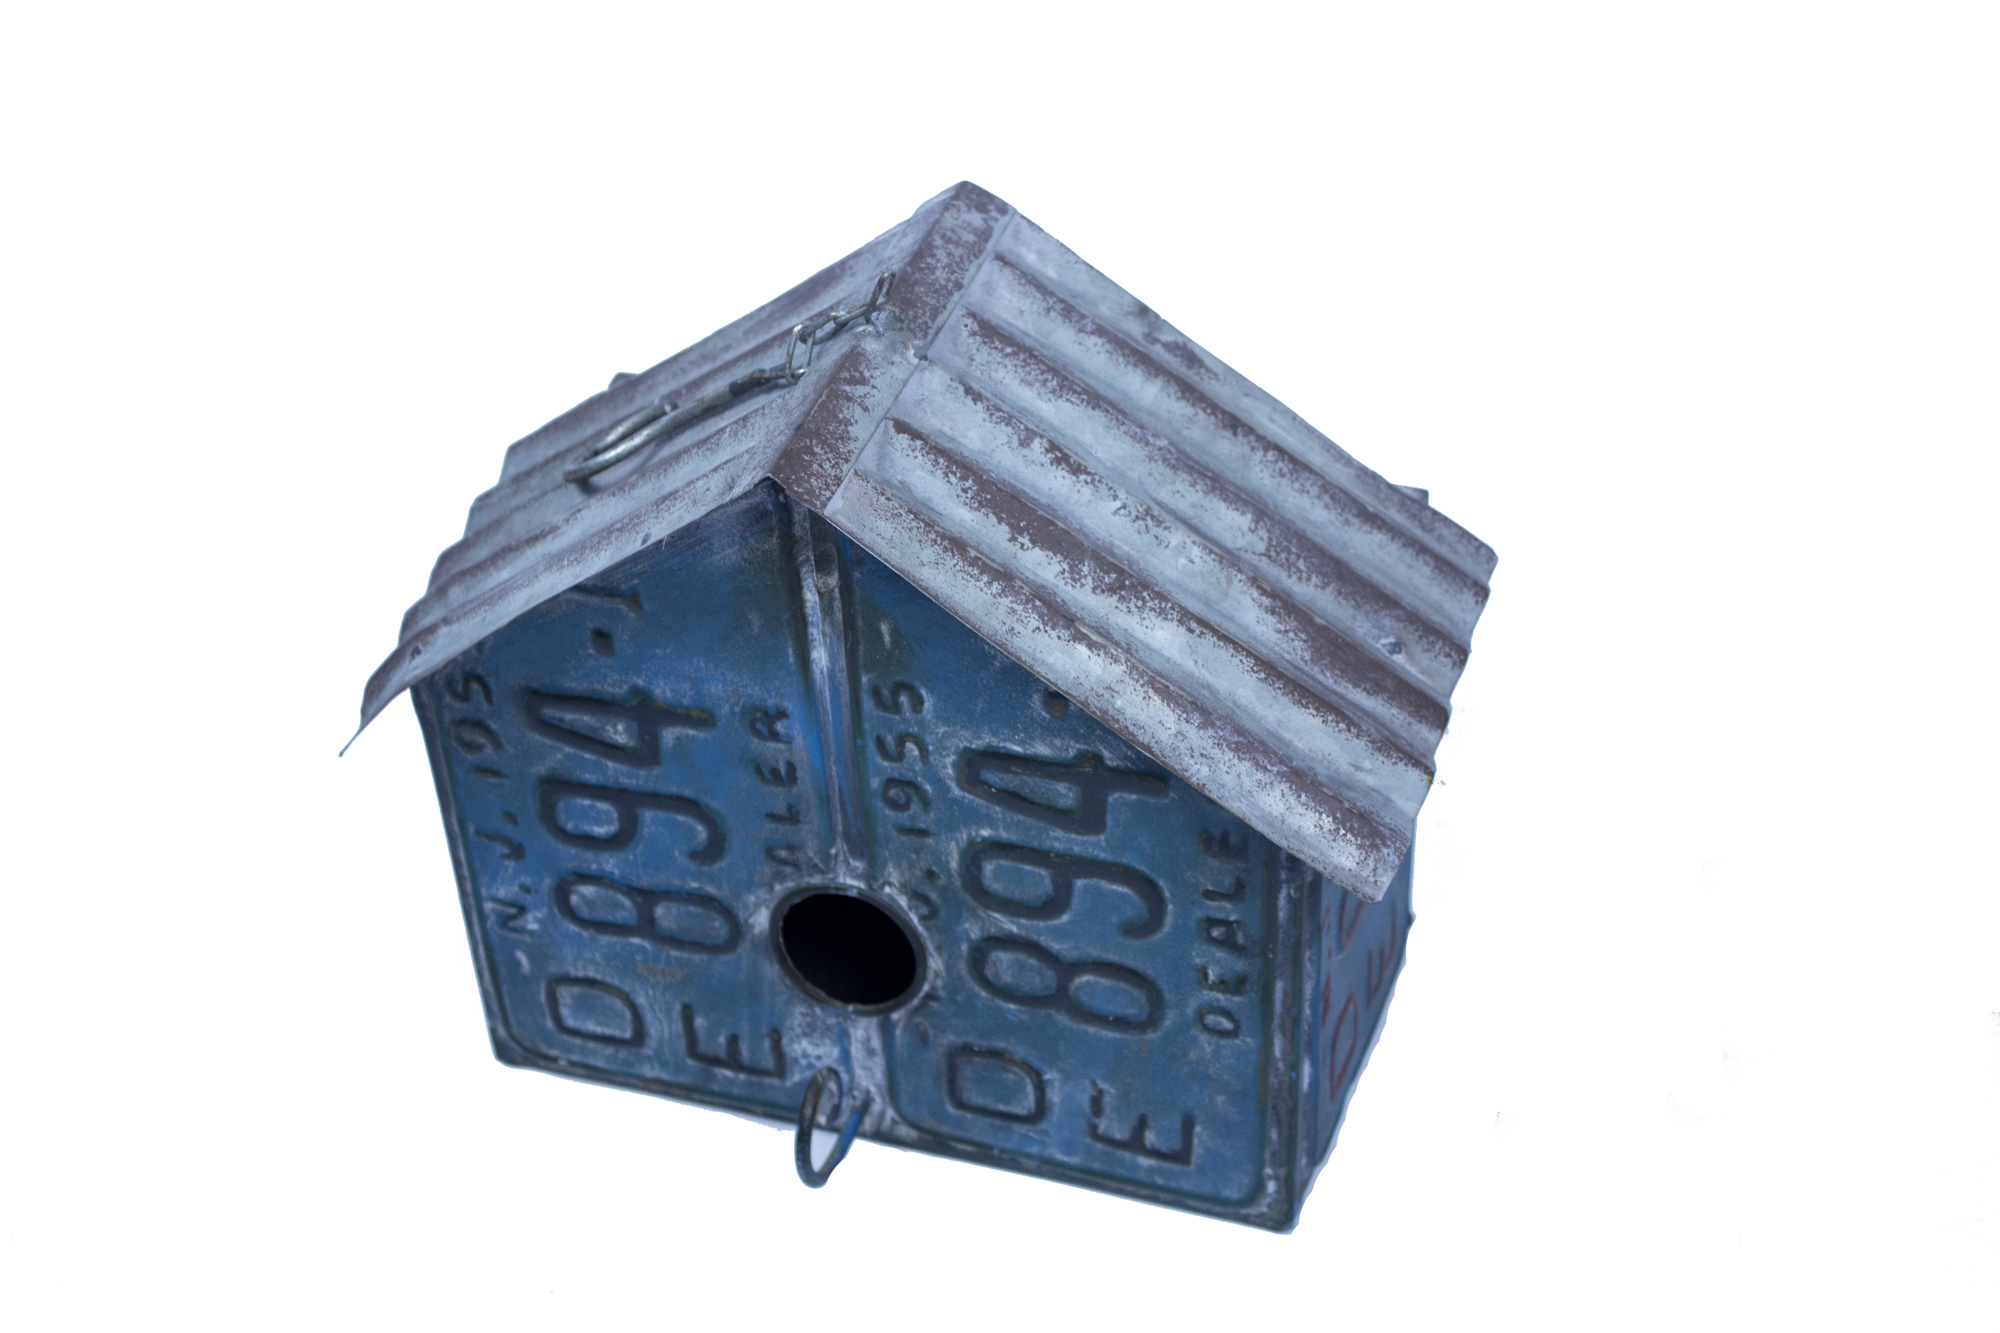 License Plate Bird House with Cleanout Door - image 1 of 1